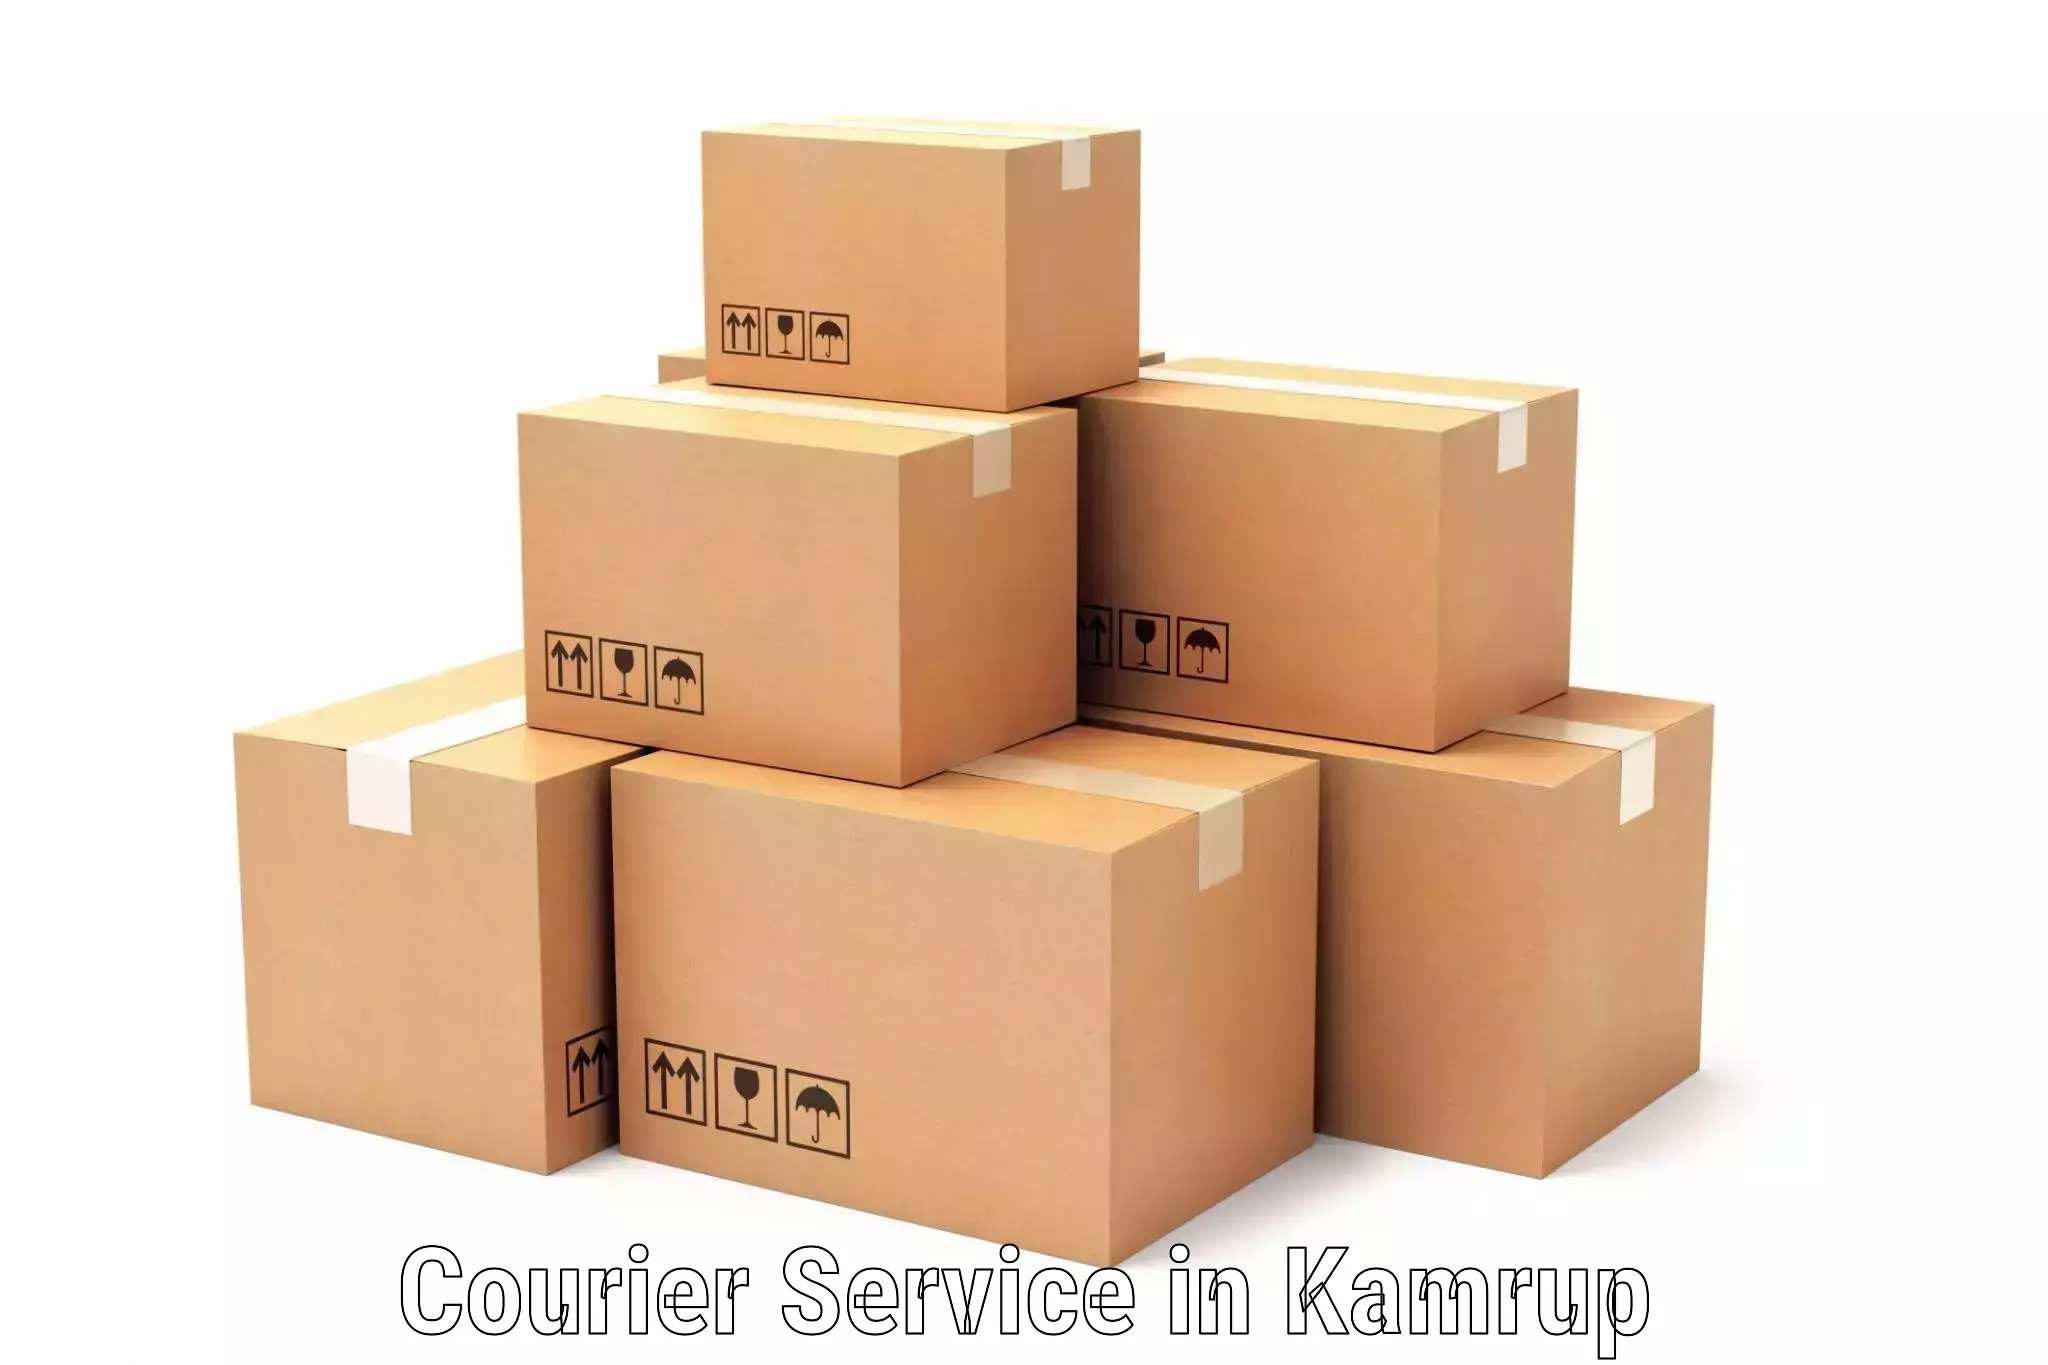 Efficient cargo services in Kamrup